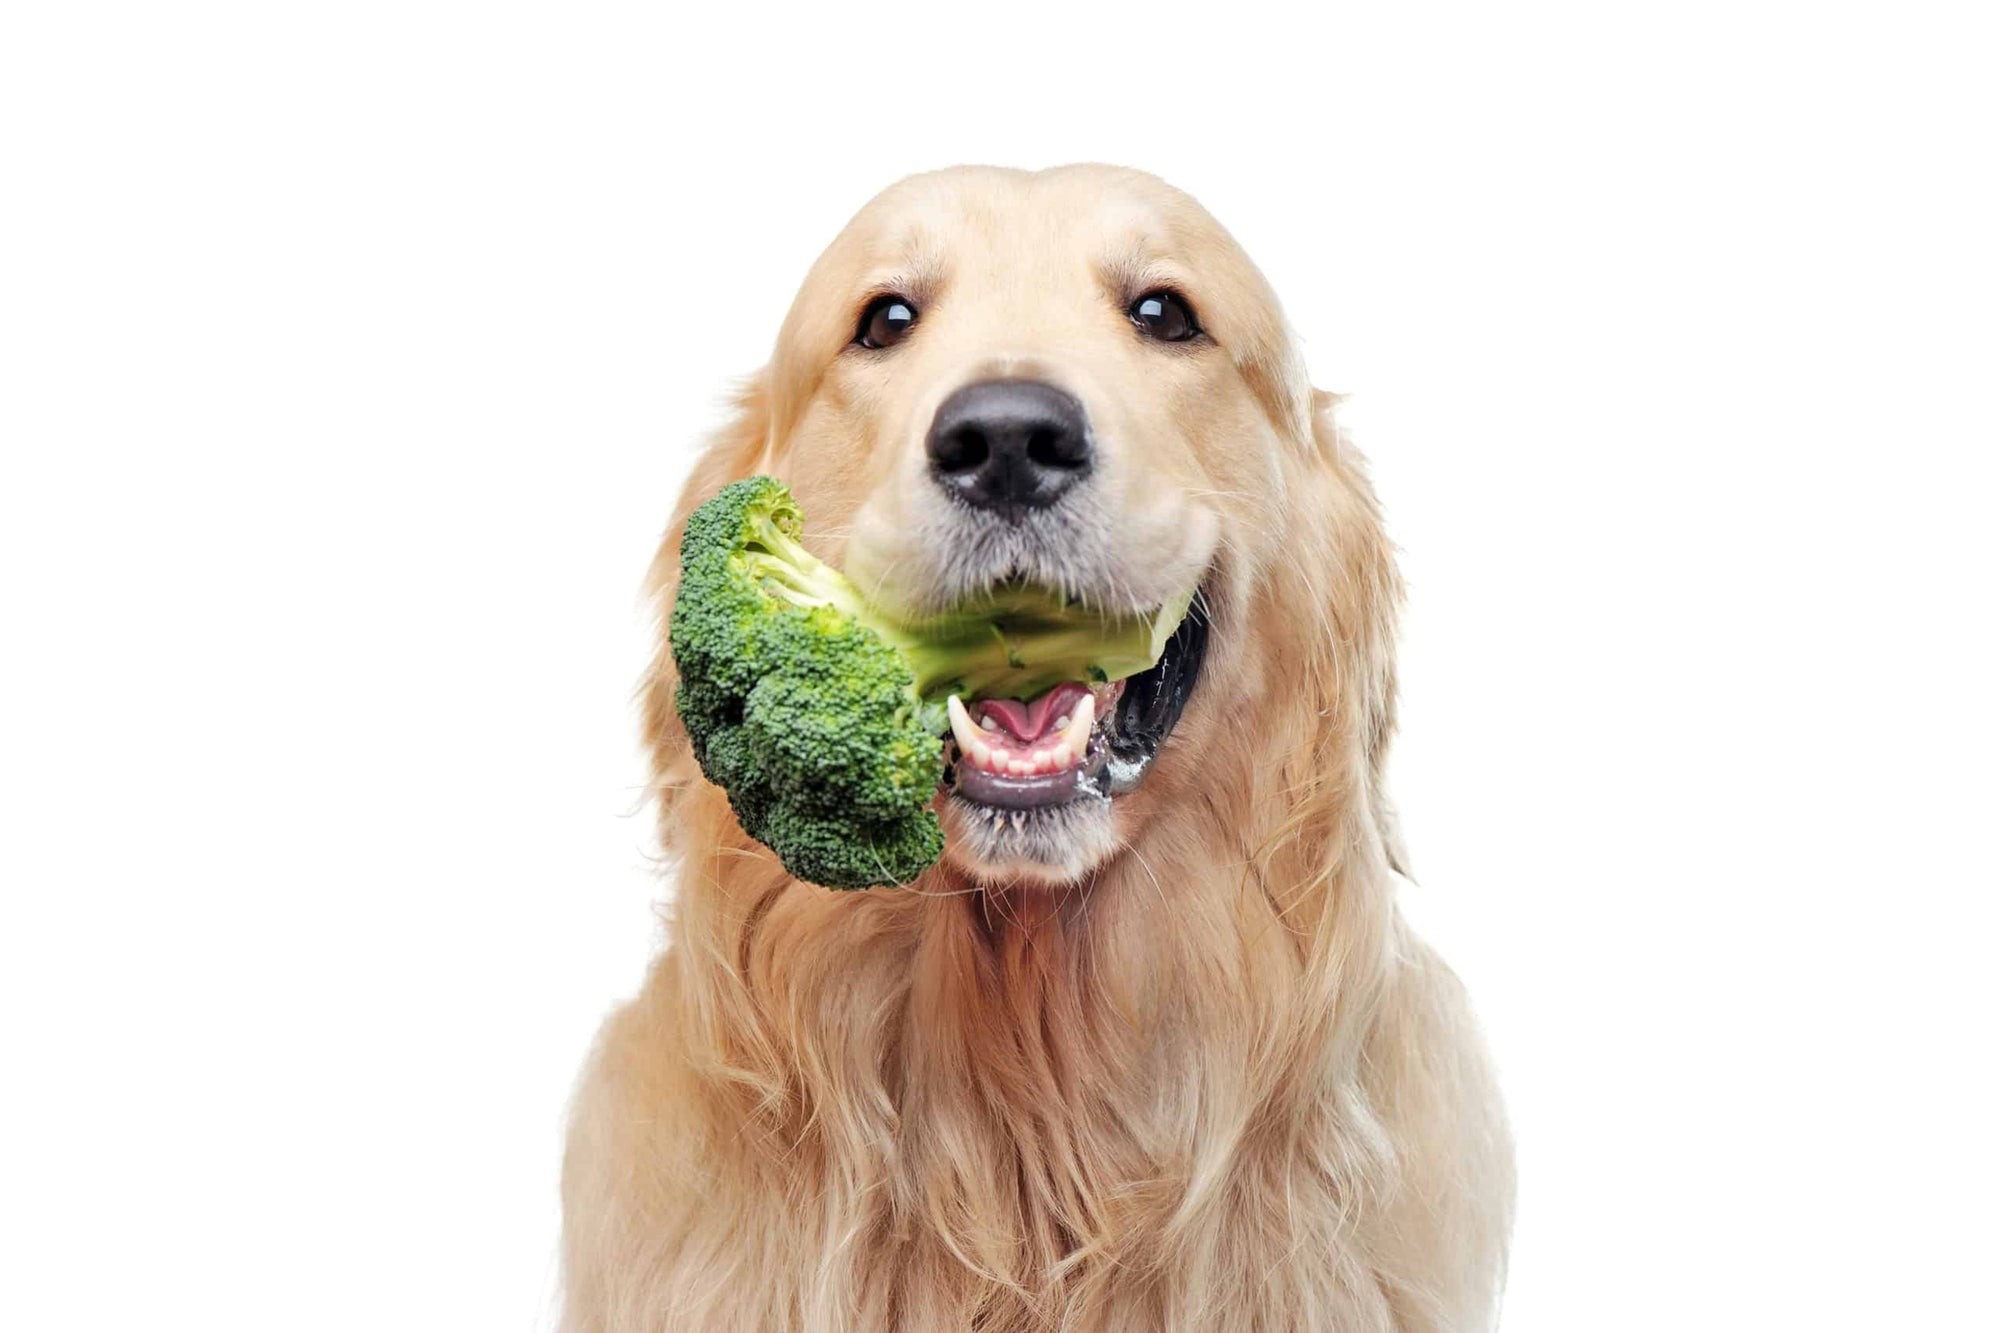 Can Dogs Eat Broccoli?